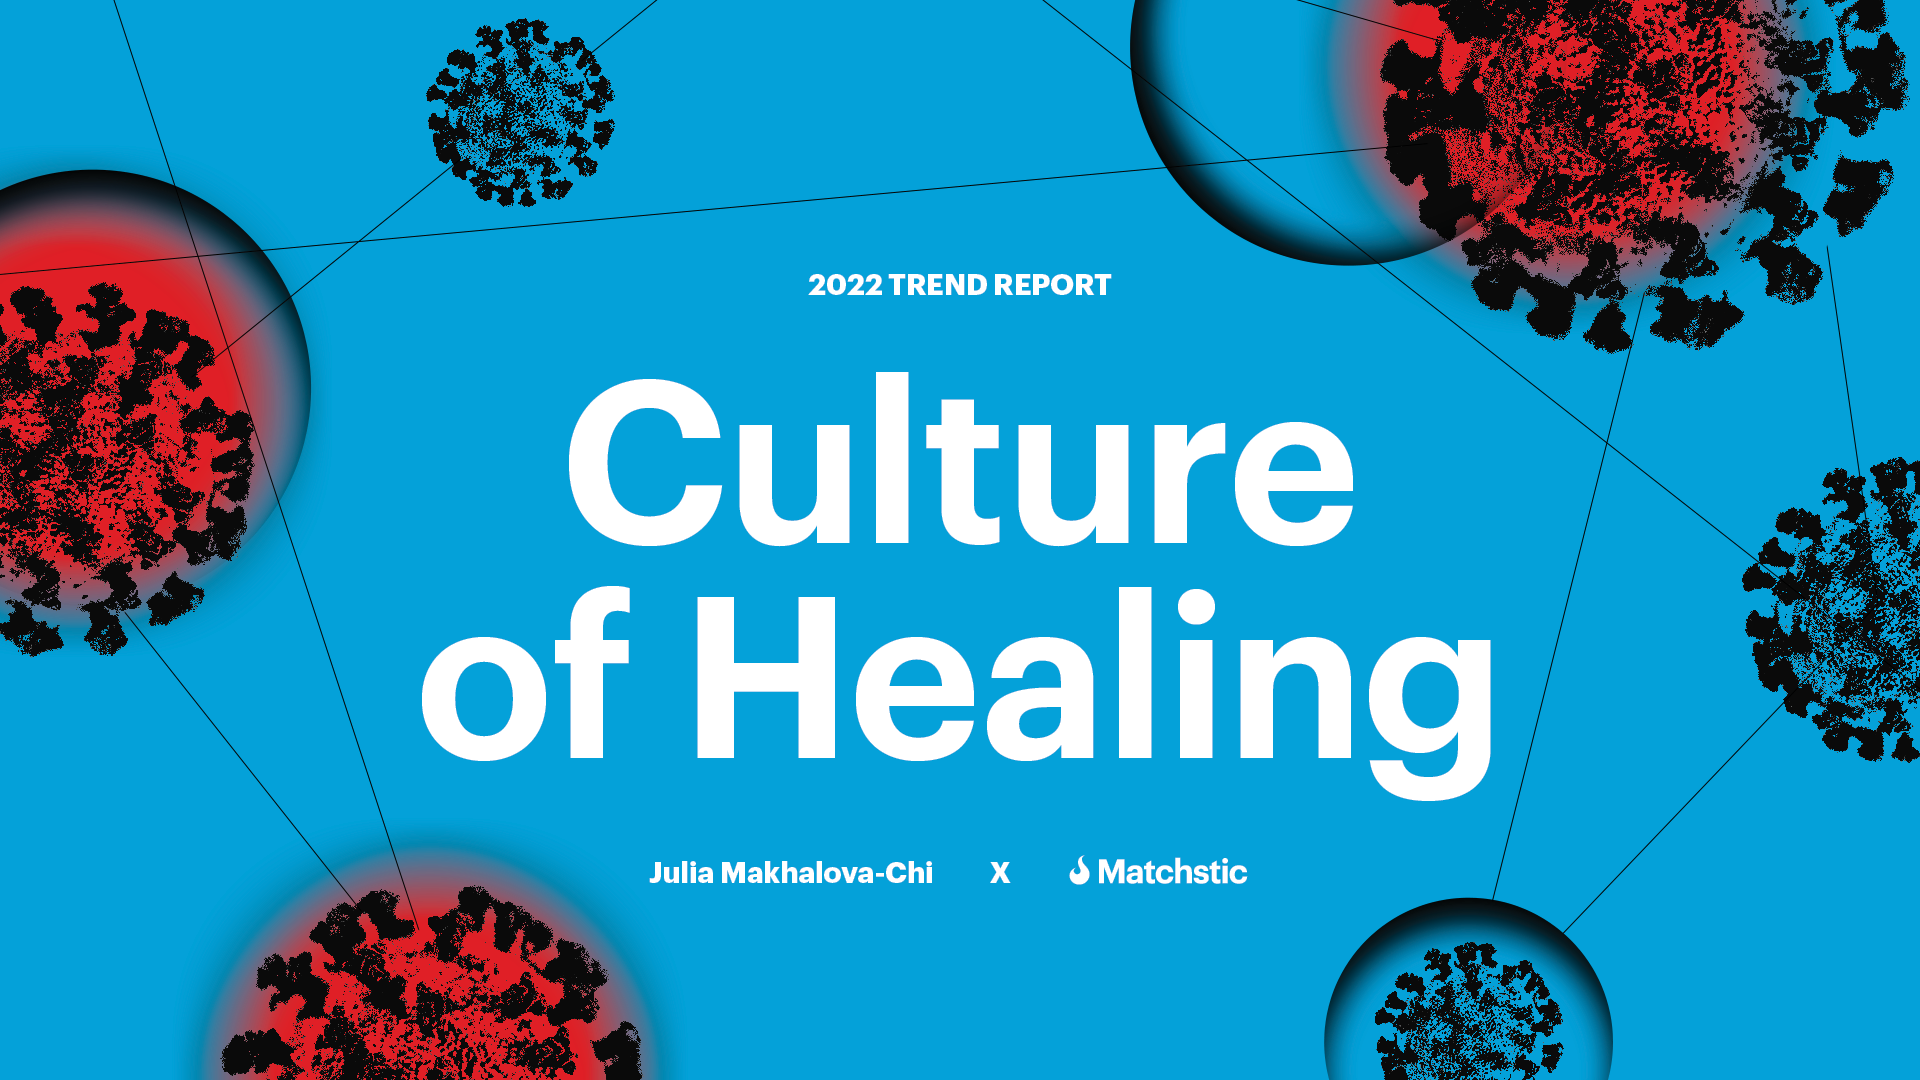 culture-of-healing-photo-trend-report-image-01.png